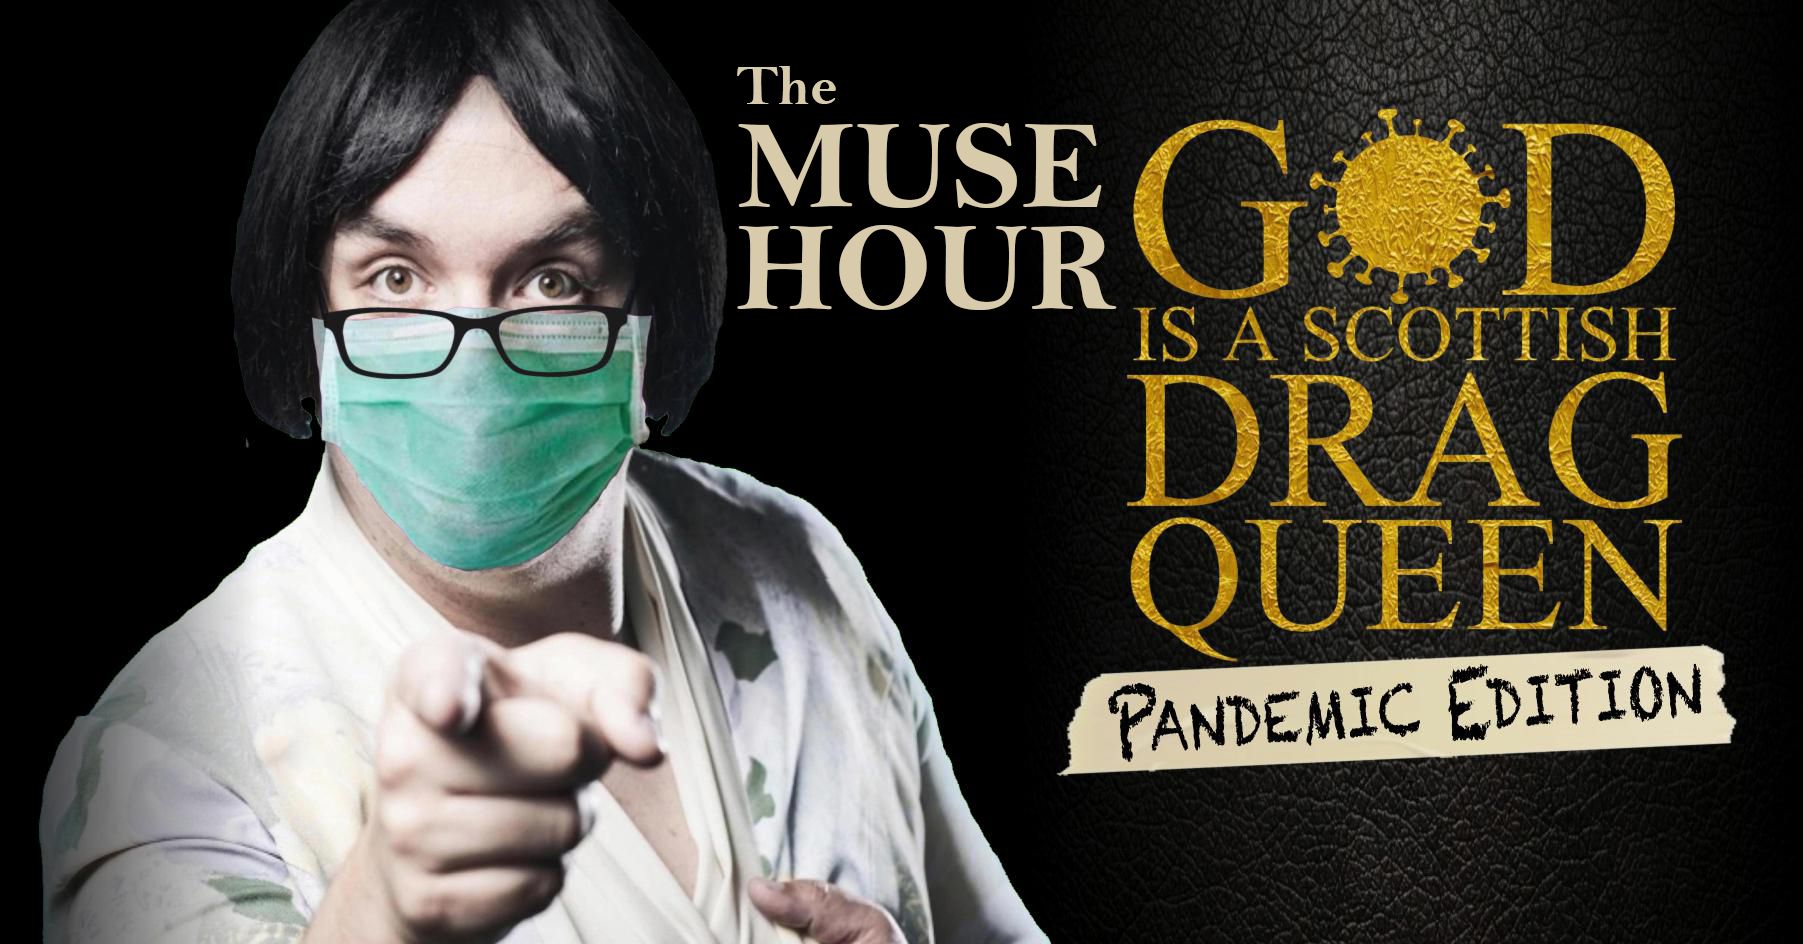 The Muse Hour